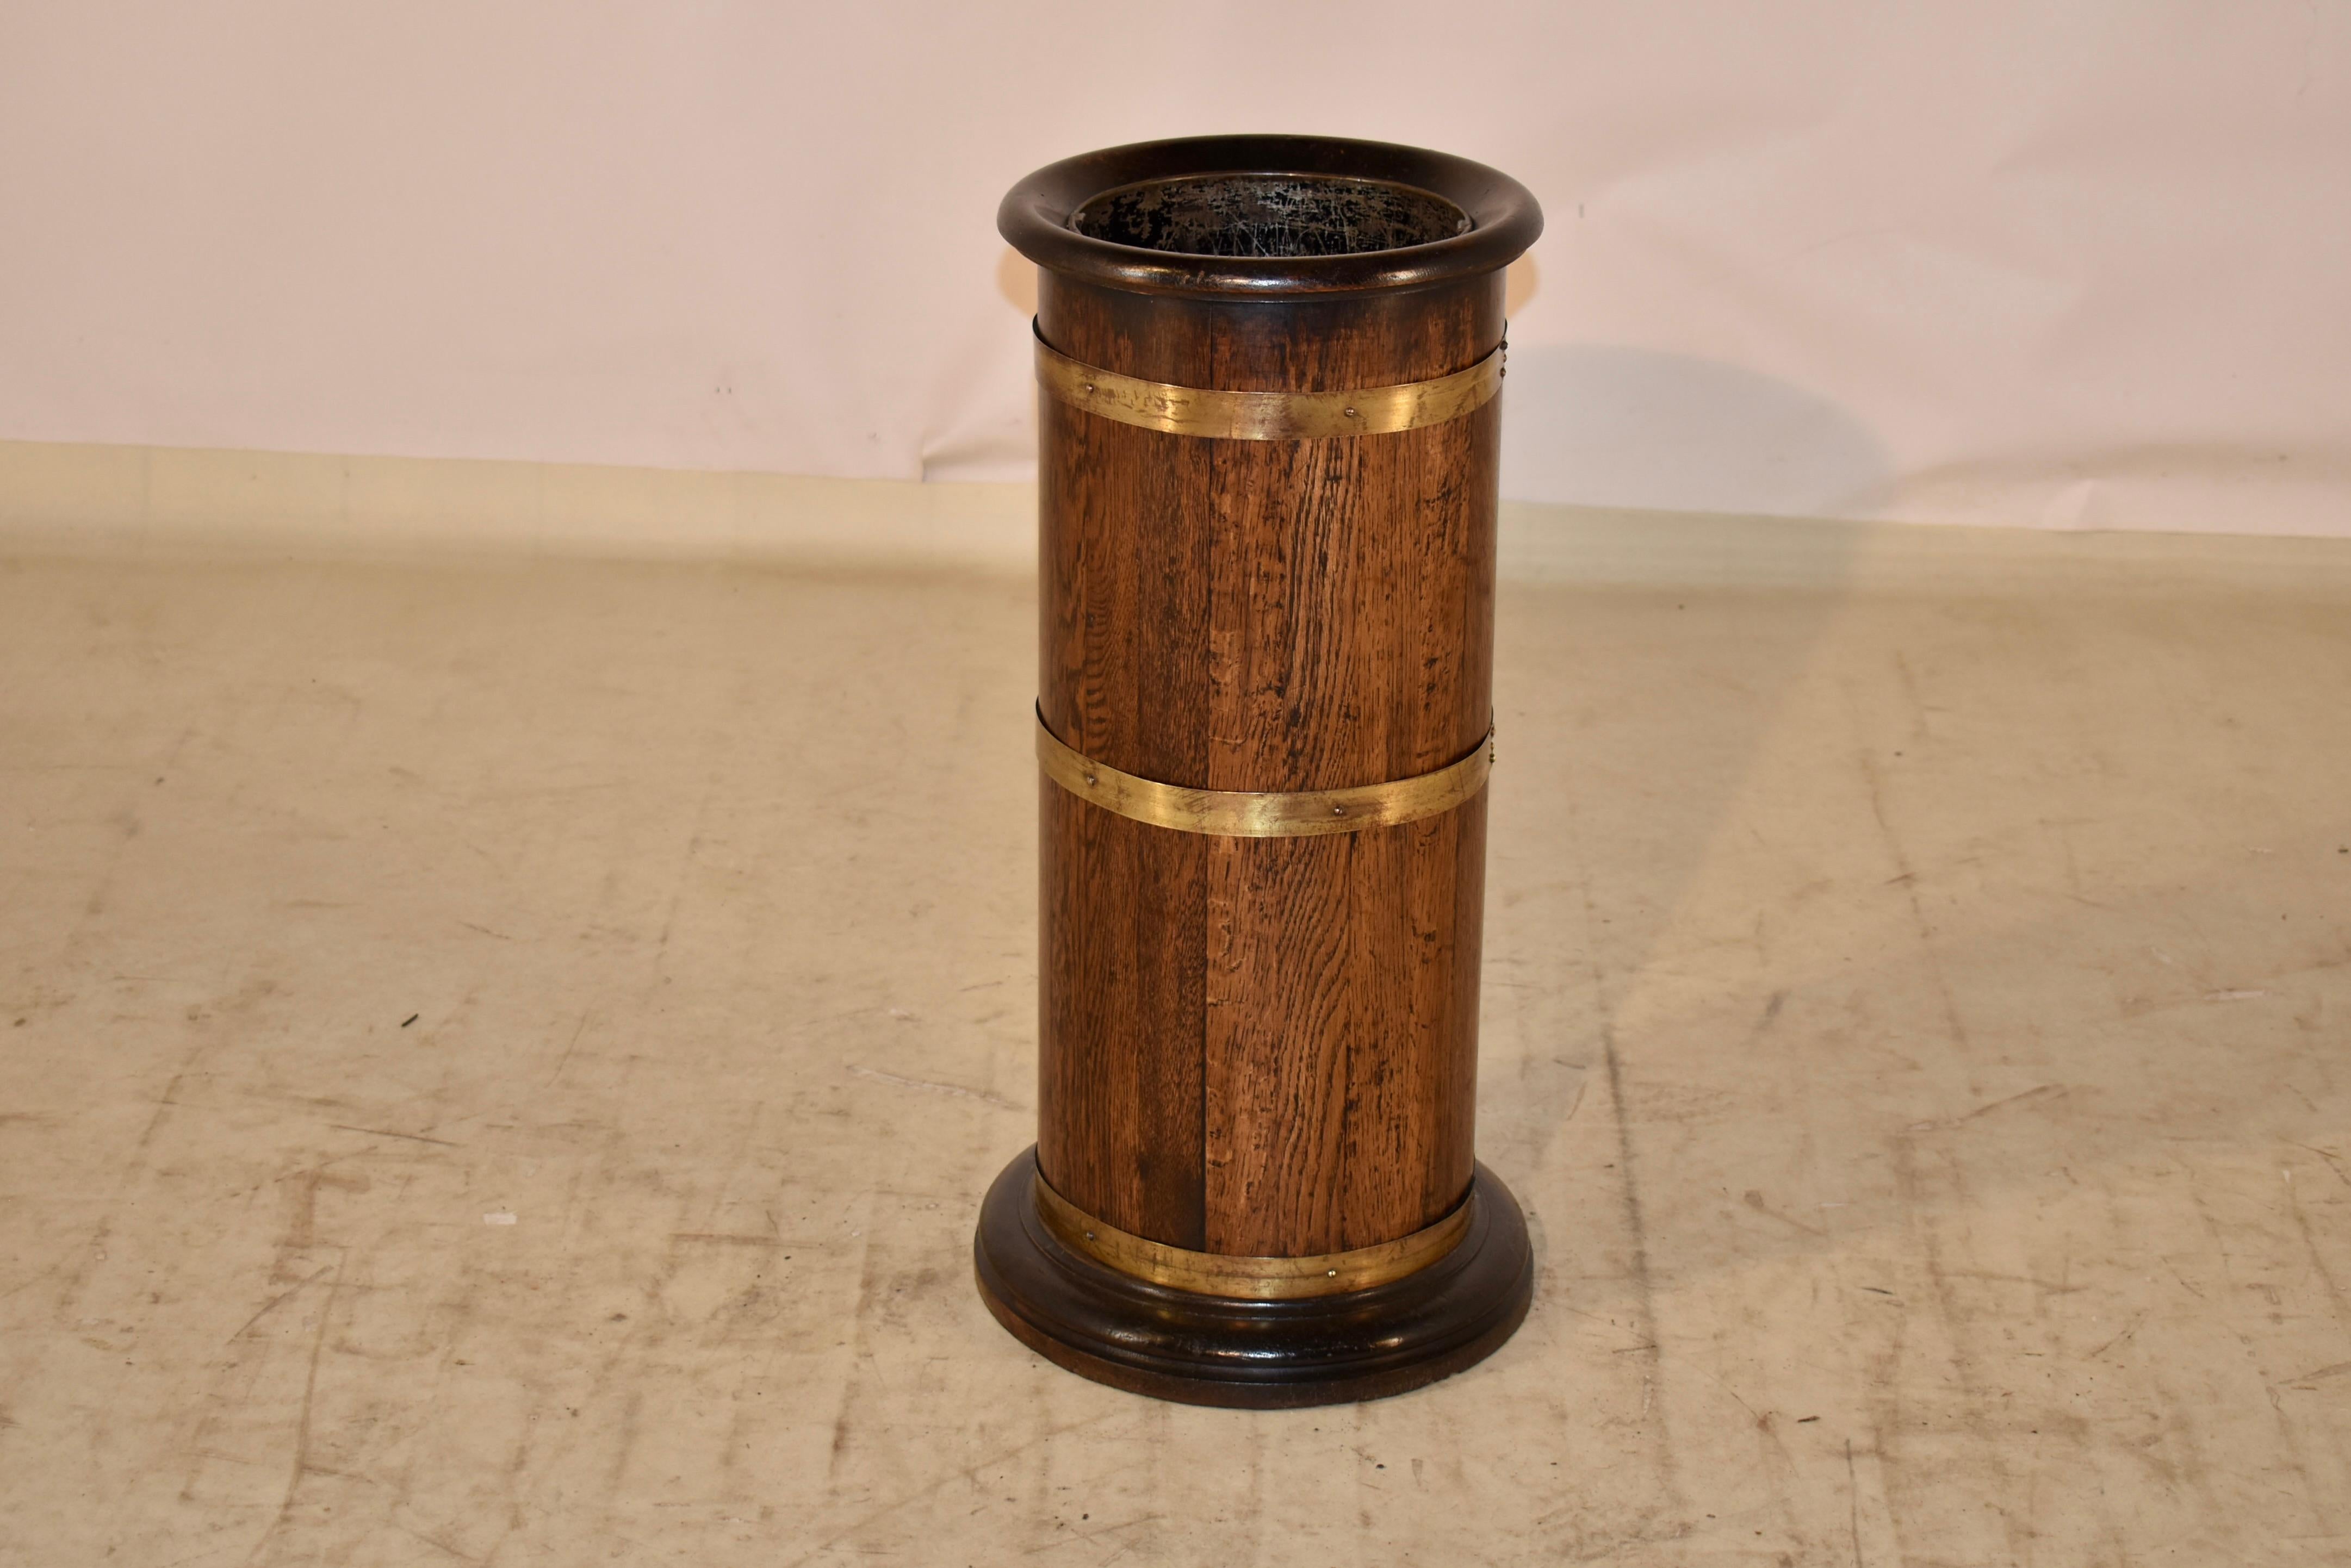 Wonderful 19th century mahogany circular umbrella stand with original metal insert and banded in brass on the sides. The base is turned and has layered bevelled edges for added interest.  This is a very unusual umbrella or stick stand due to its